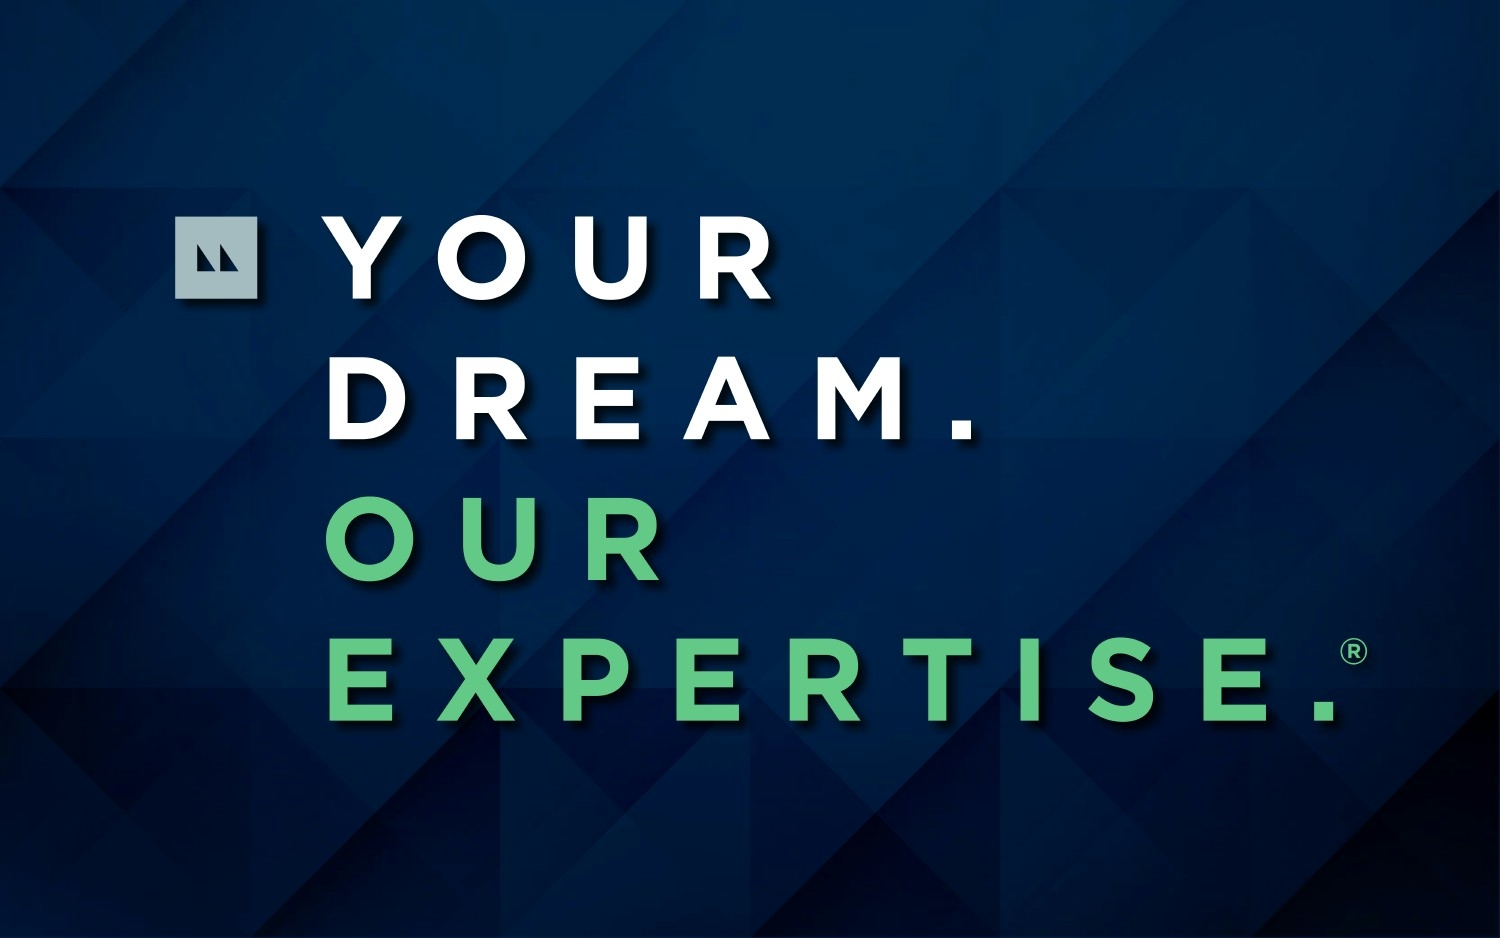 Your Dream. Our Expertise.